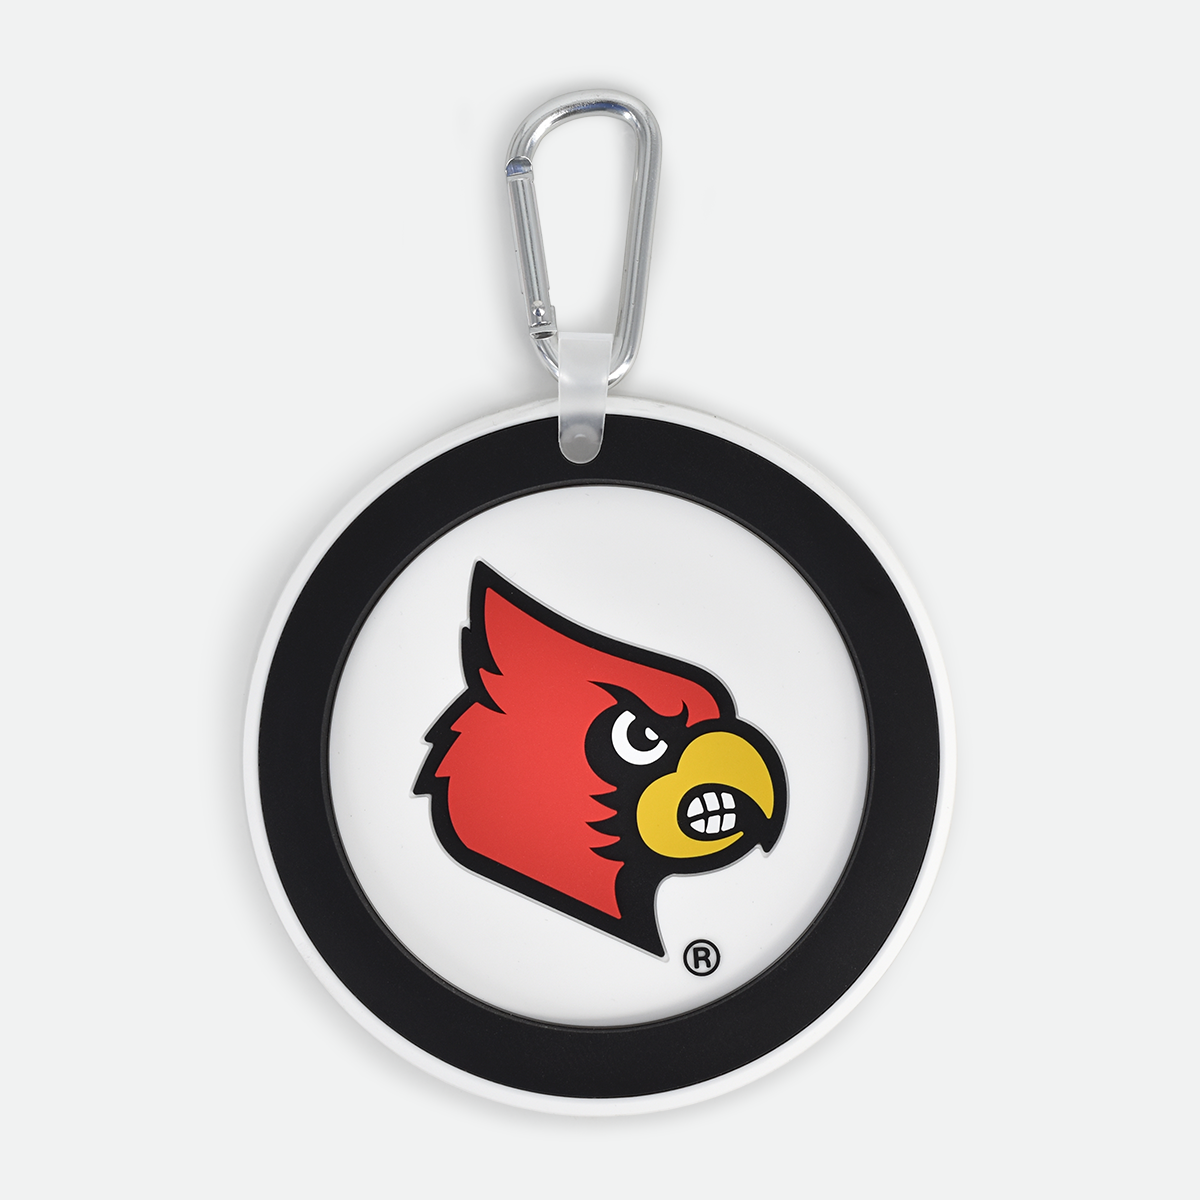 louisville cardinals luggage tag